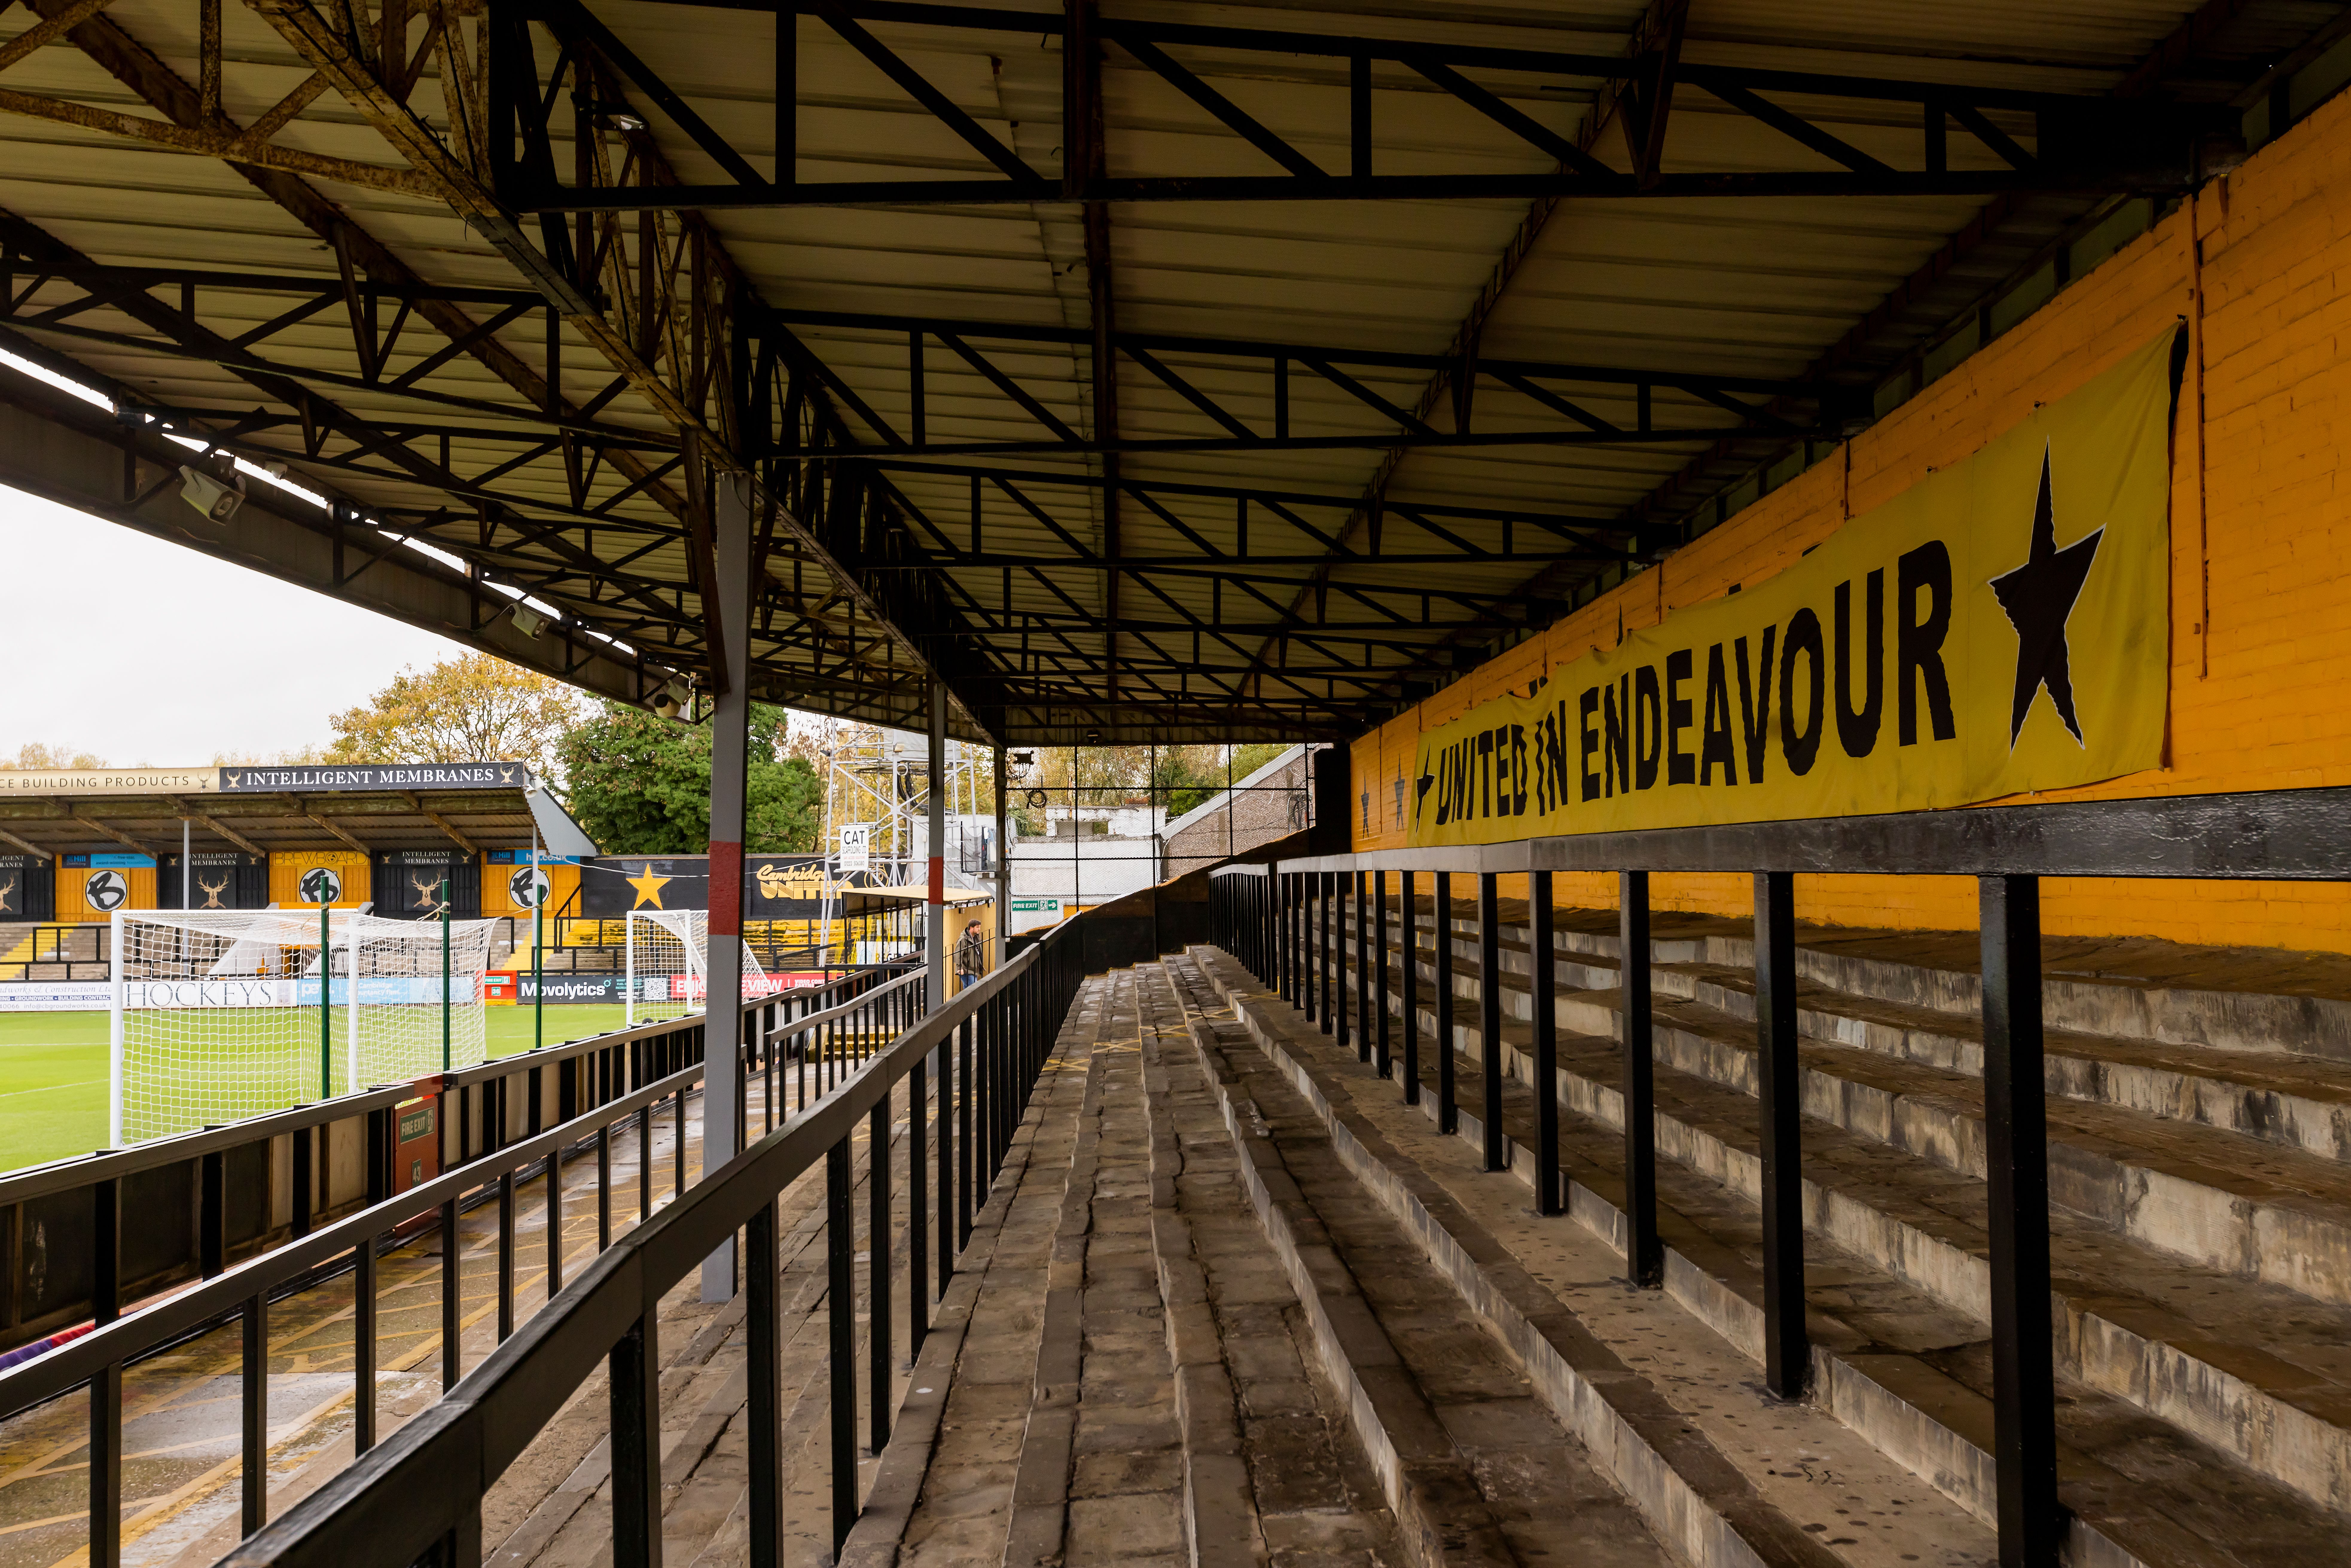 The Newmarket Road End